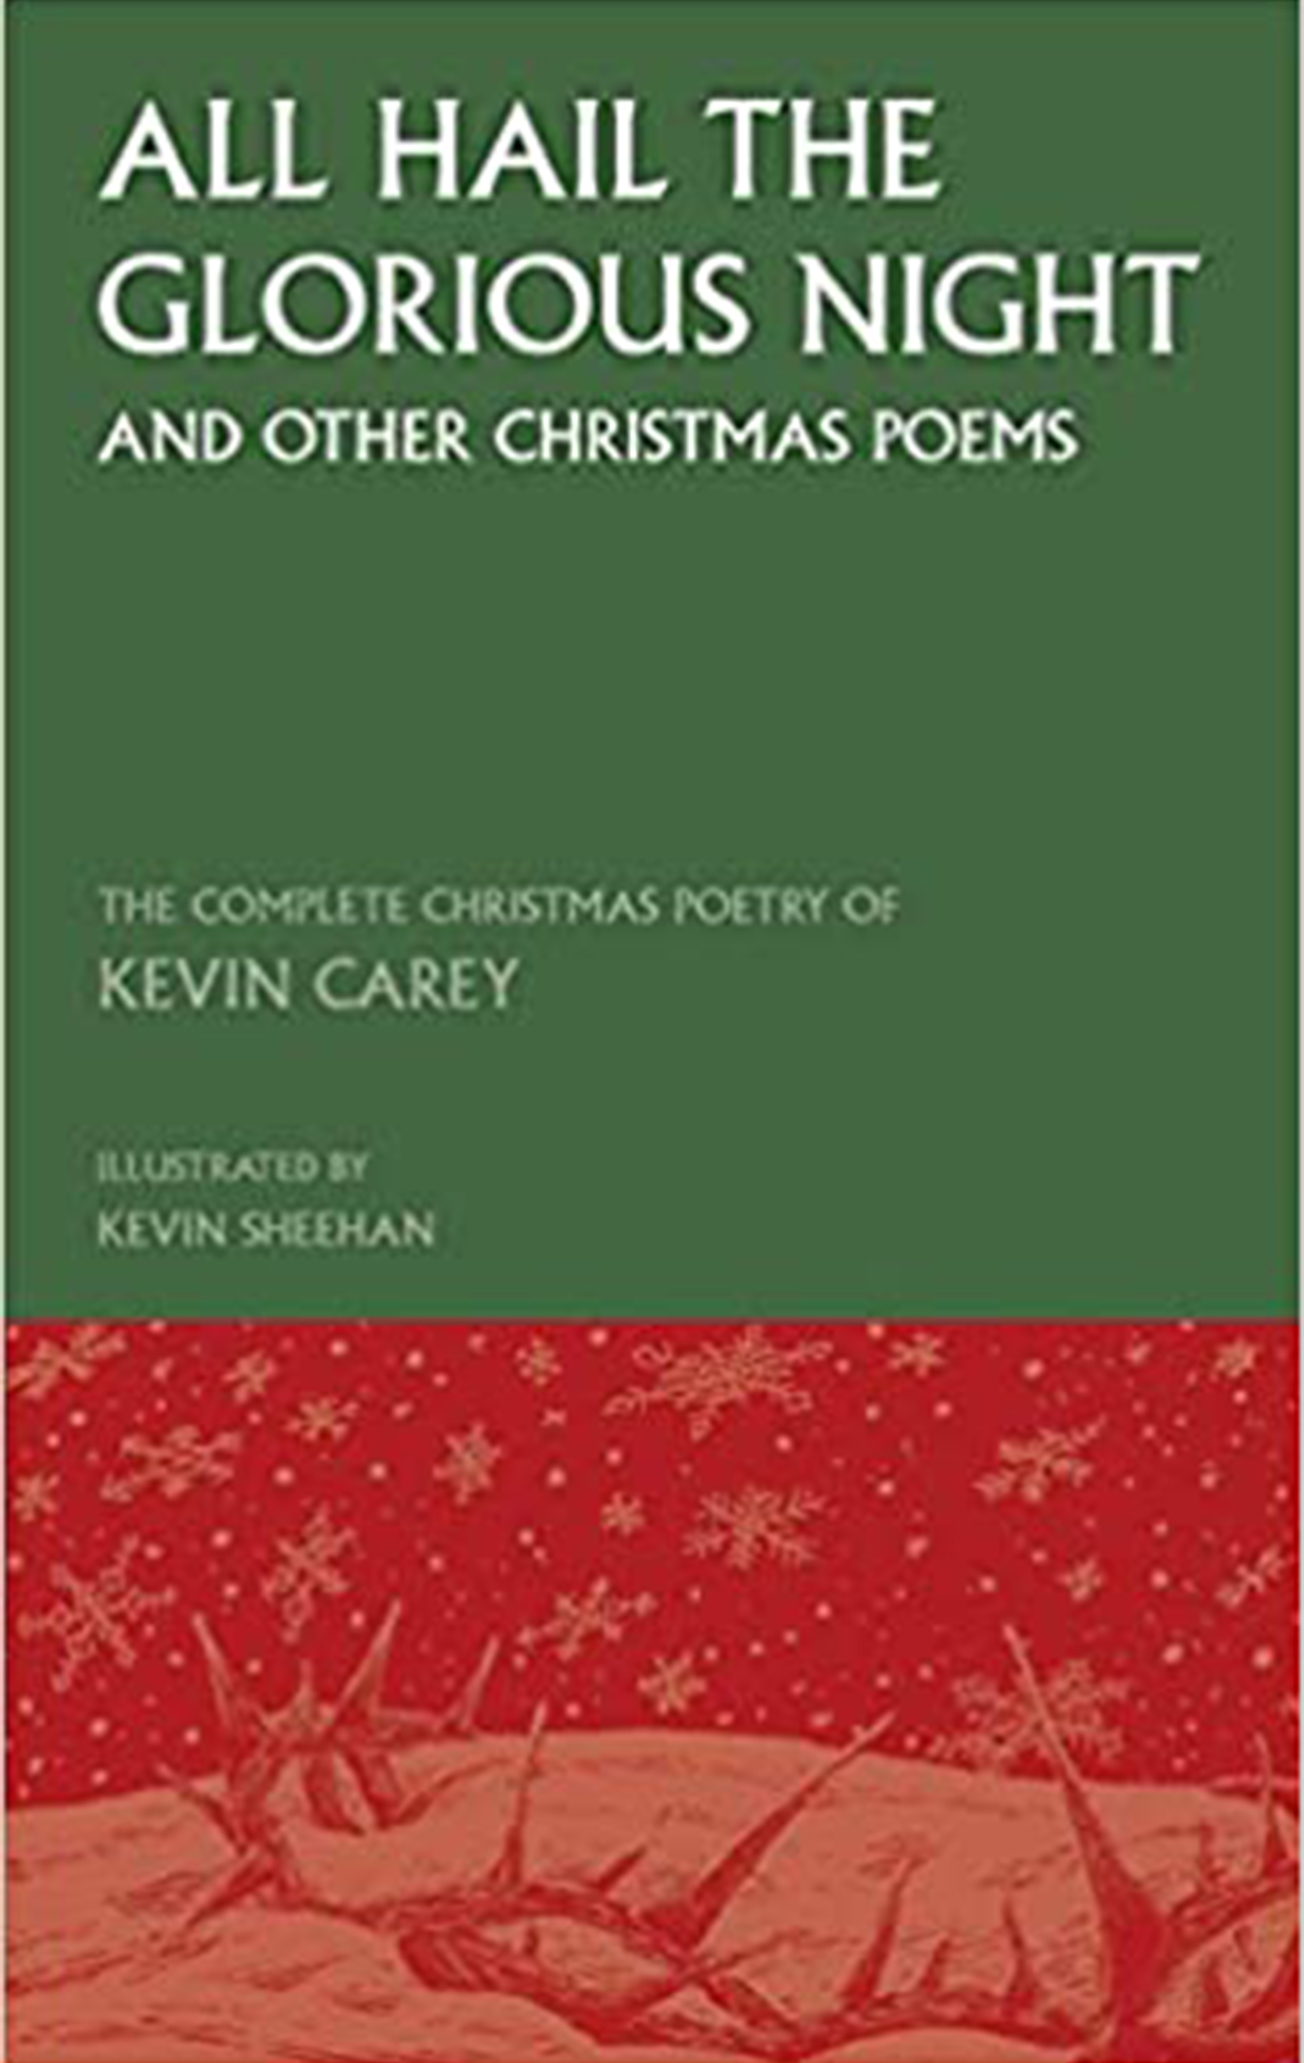 All Hail the Glorious Night and Other Christmas Poems